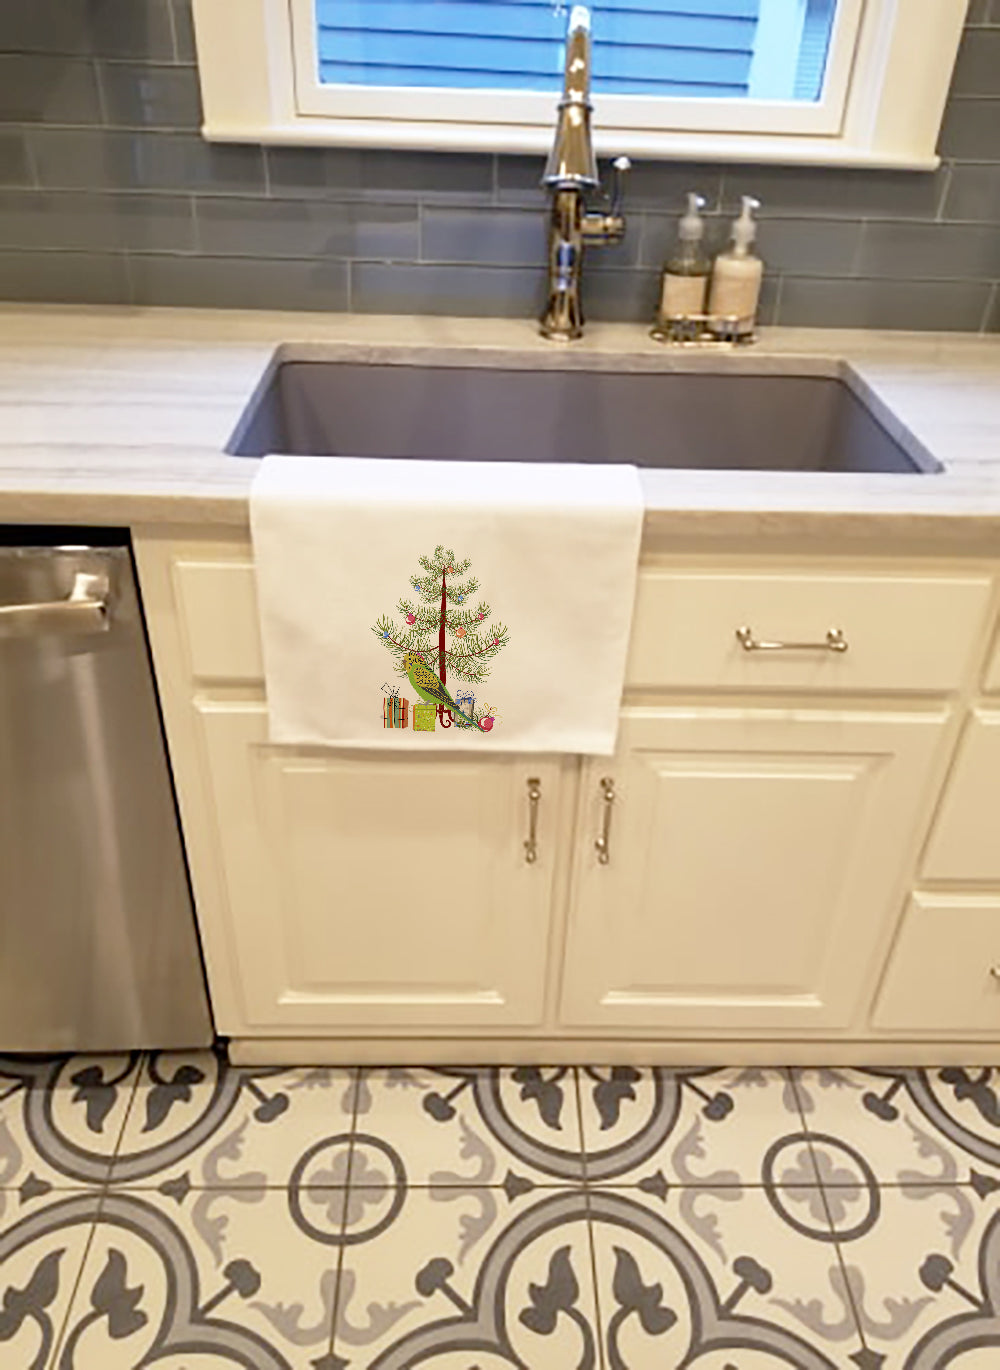 Buy this Budgerigar Merry Christmas White Kitchen Towel Set of 2